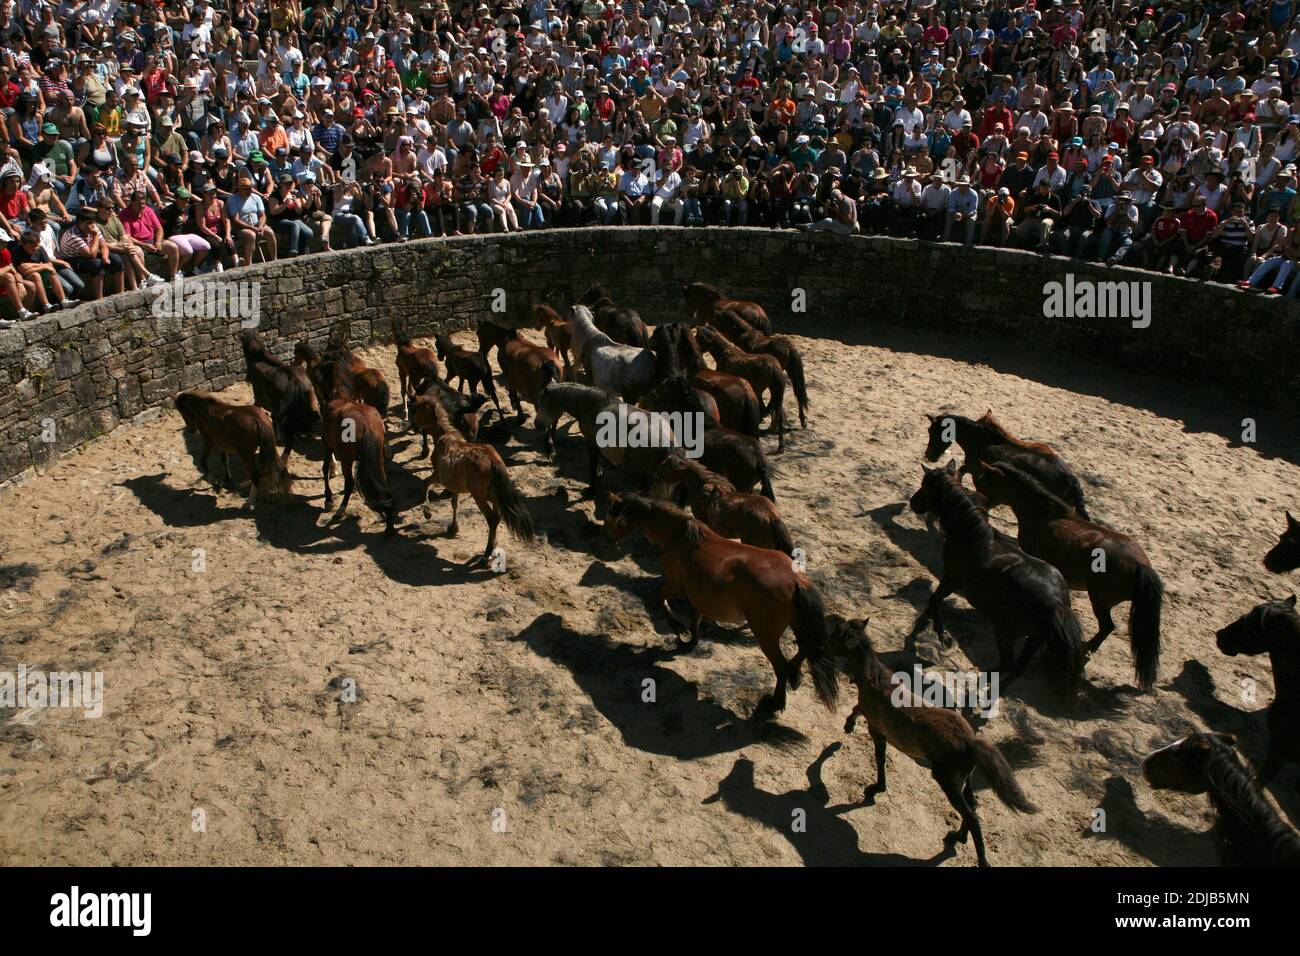 Galician unbroken horses fill the curro (round arena) during the Rapa das Bestas in the village of Sabucedo in Galicia, Spain. Galician horses live free at the highland pastures throughout the year. One day in July six hundred horses are driven together down to the village, where traditional horse taming festival known as the Rapa das Bestas (Shearing of the Beasts) takes place in the round arena known as the curro. Brave local fighters known as the aloitadores have to saddle each horse, maddened after the sudden displacement from the highlands to the arena, and then cut their tails and manes. Stock Photo